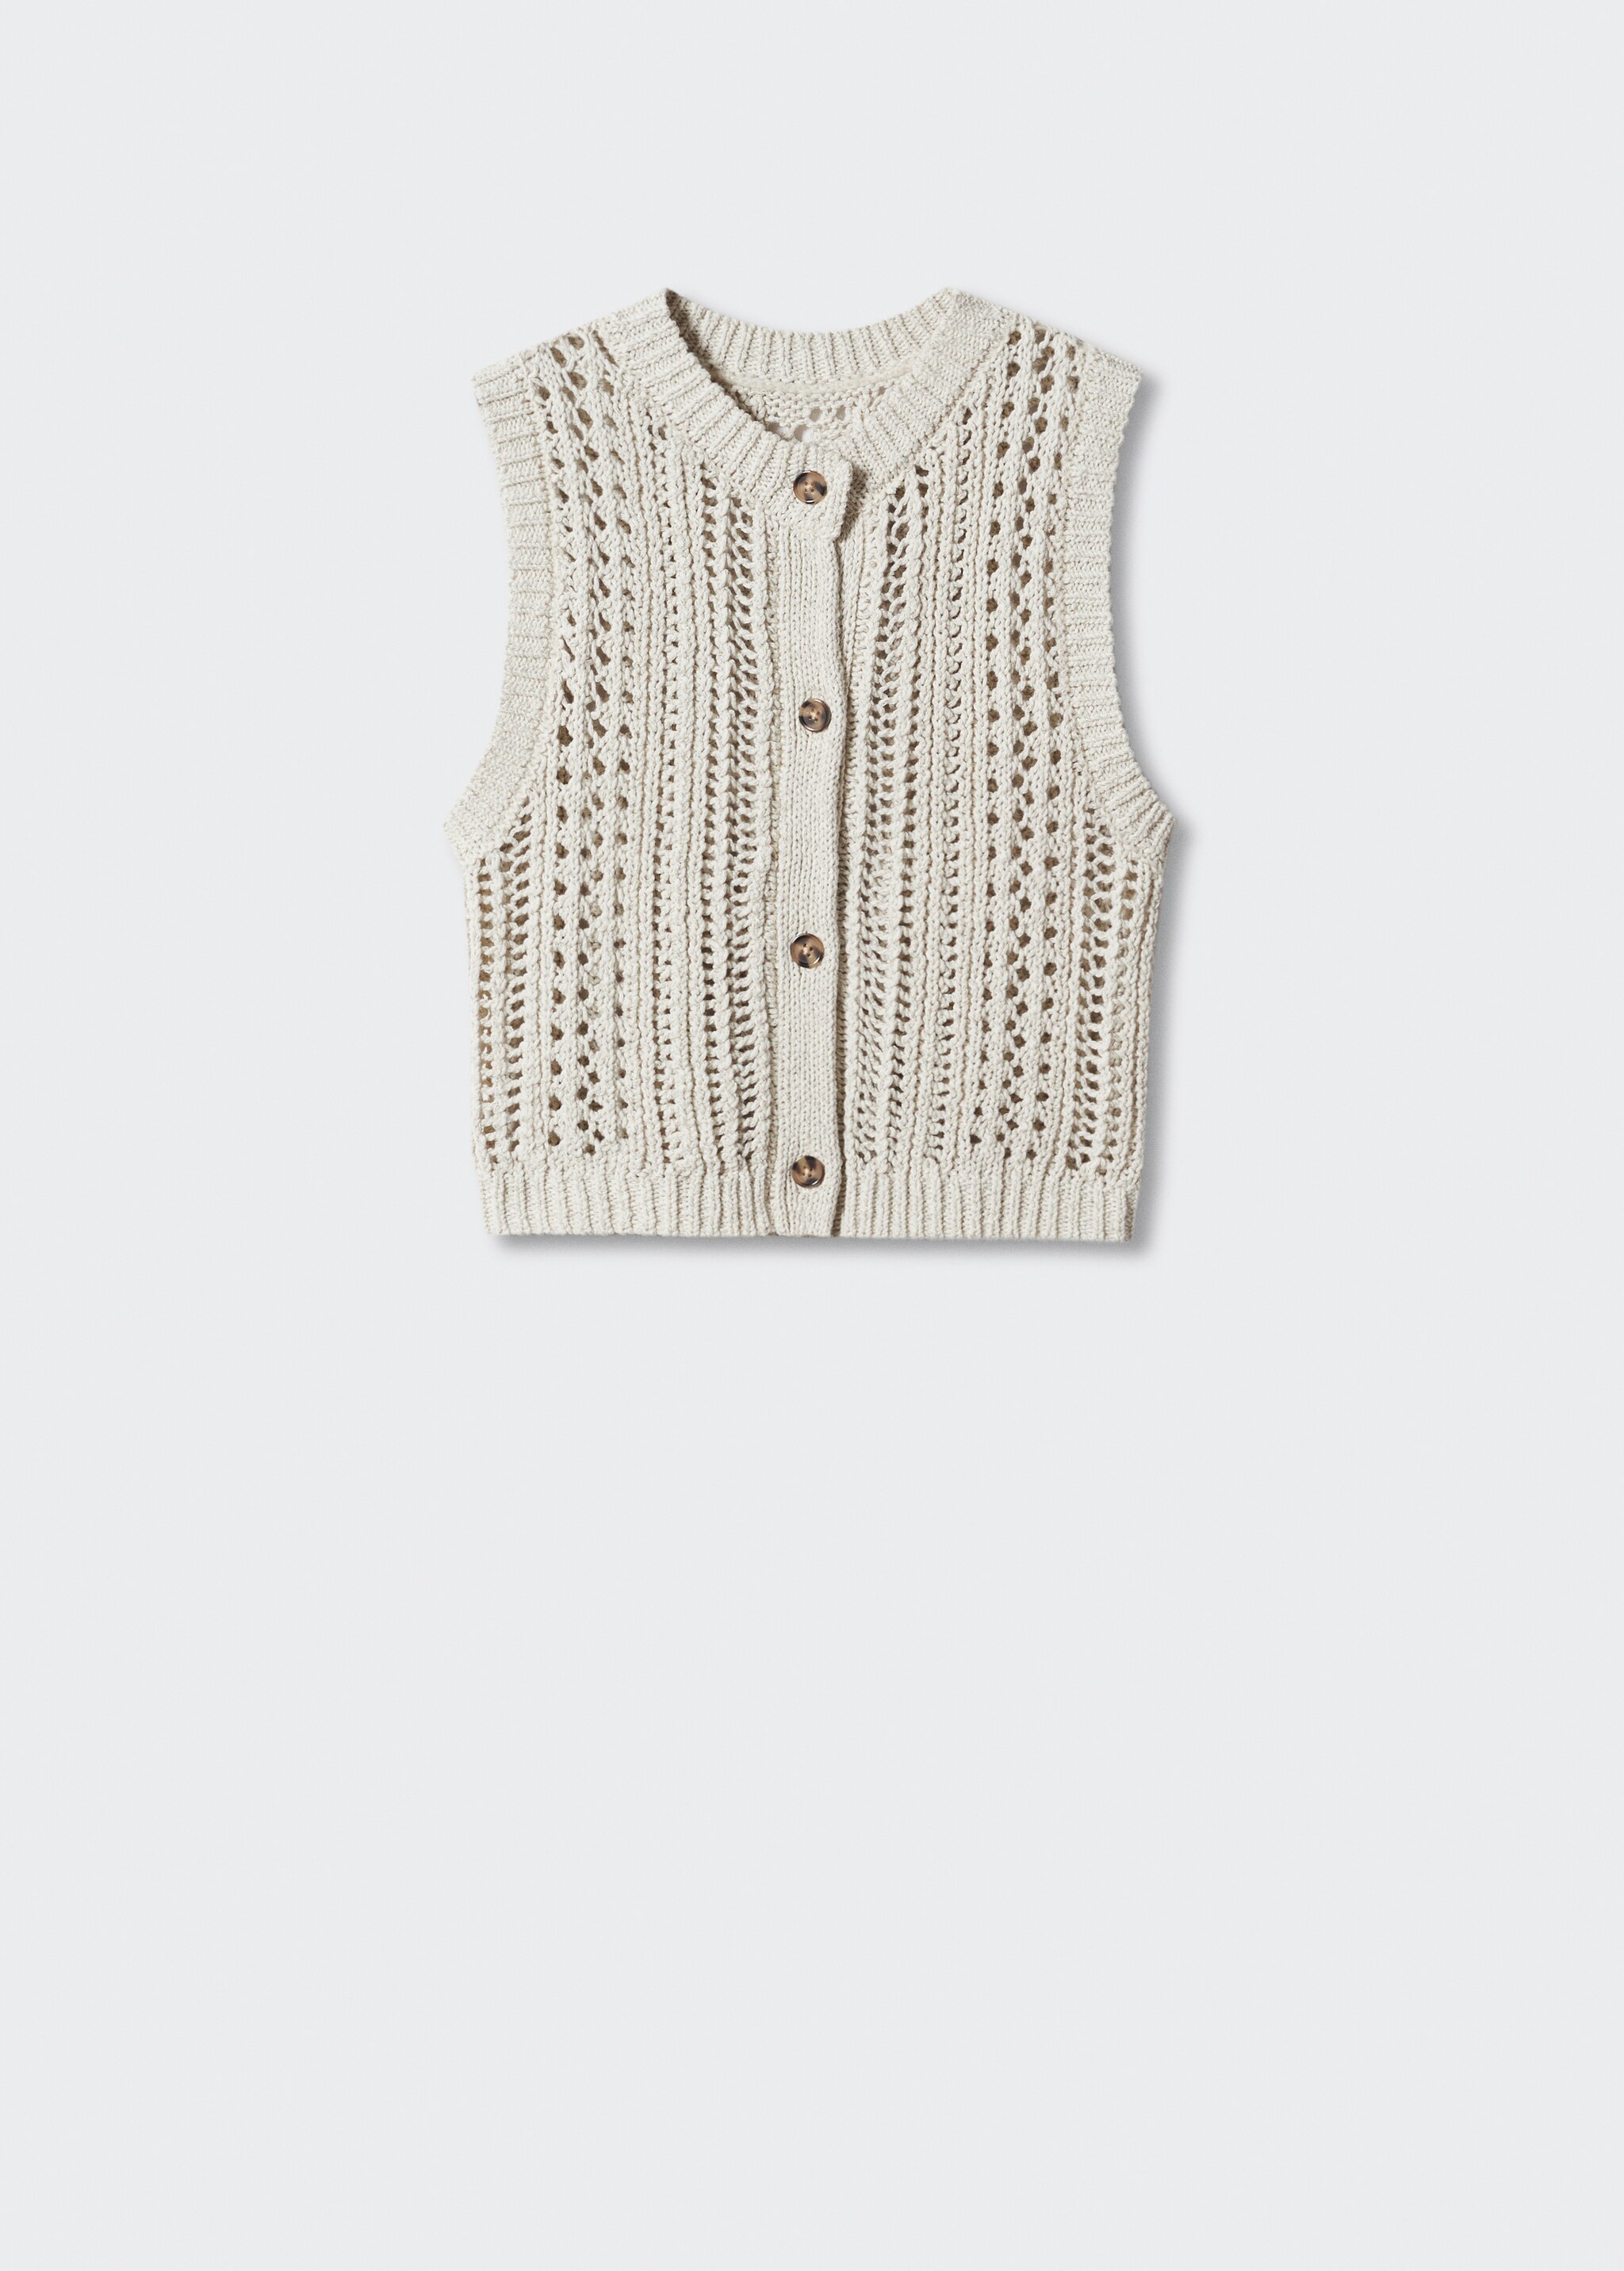 Openwork knit cotton cardigan - Article without model